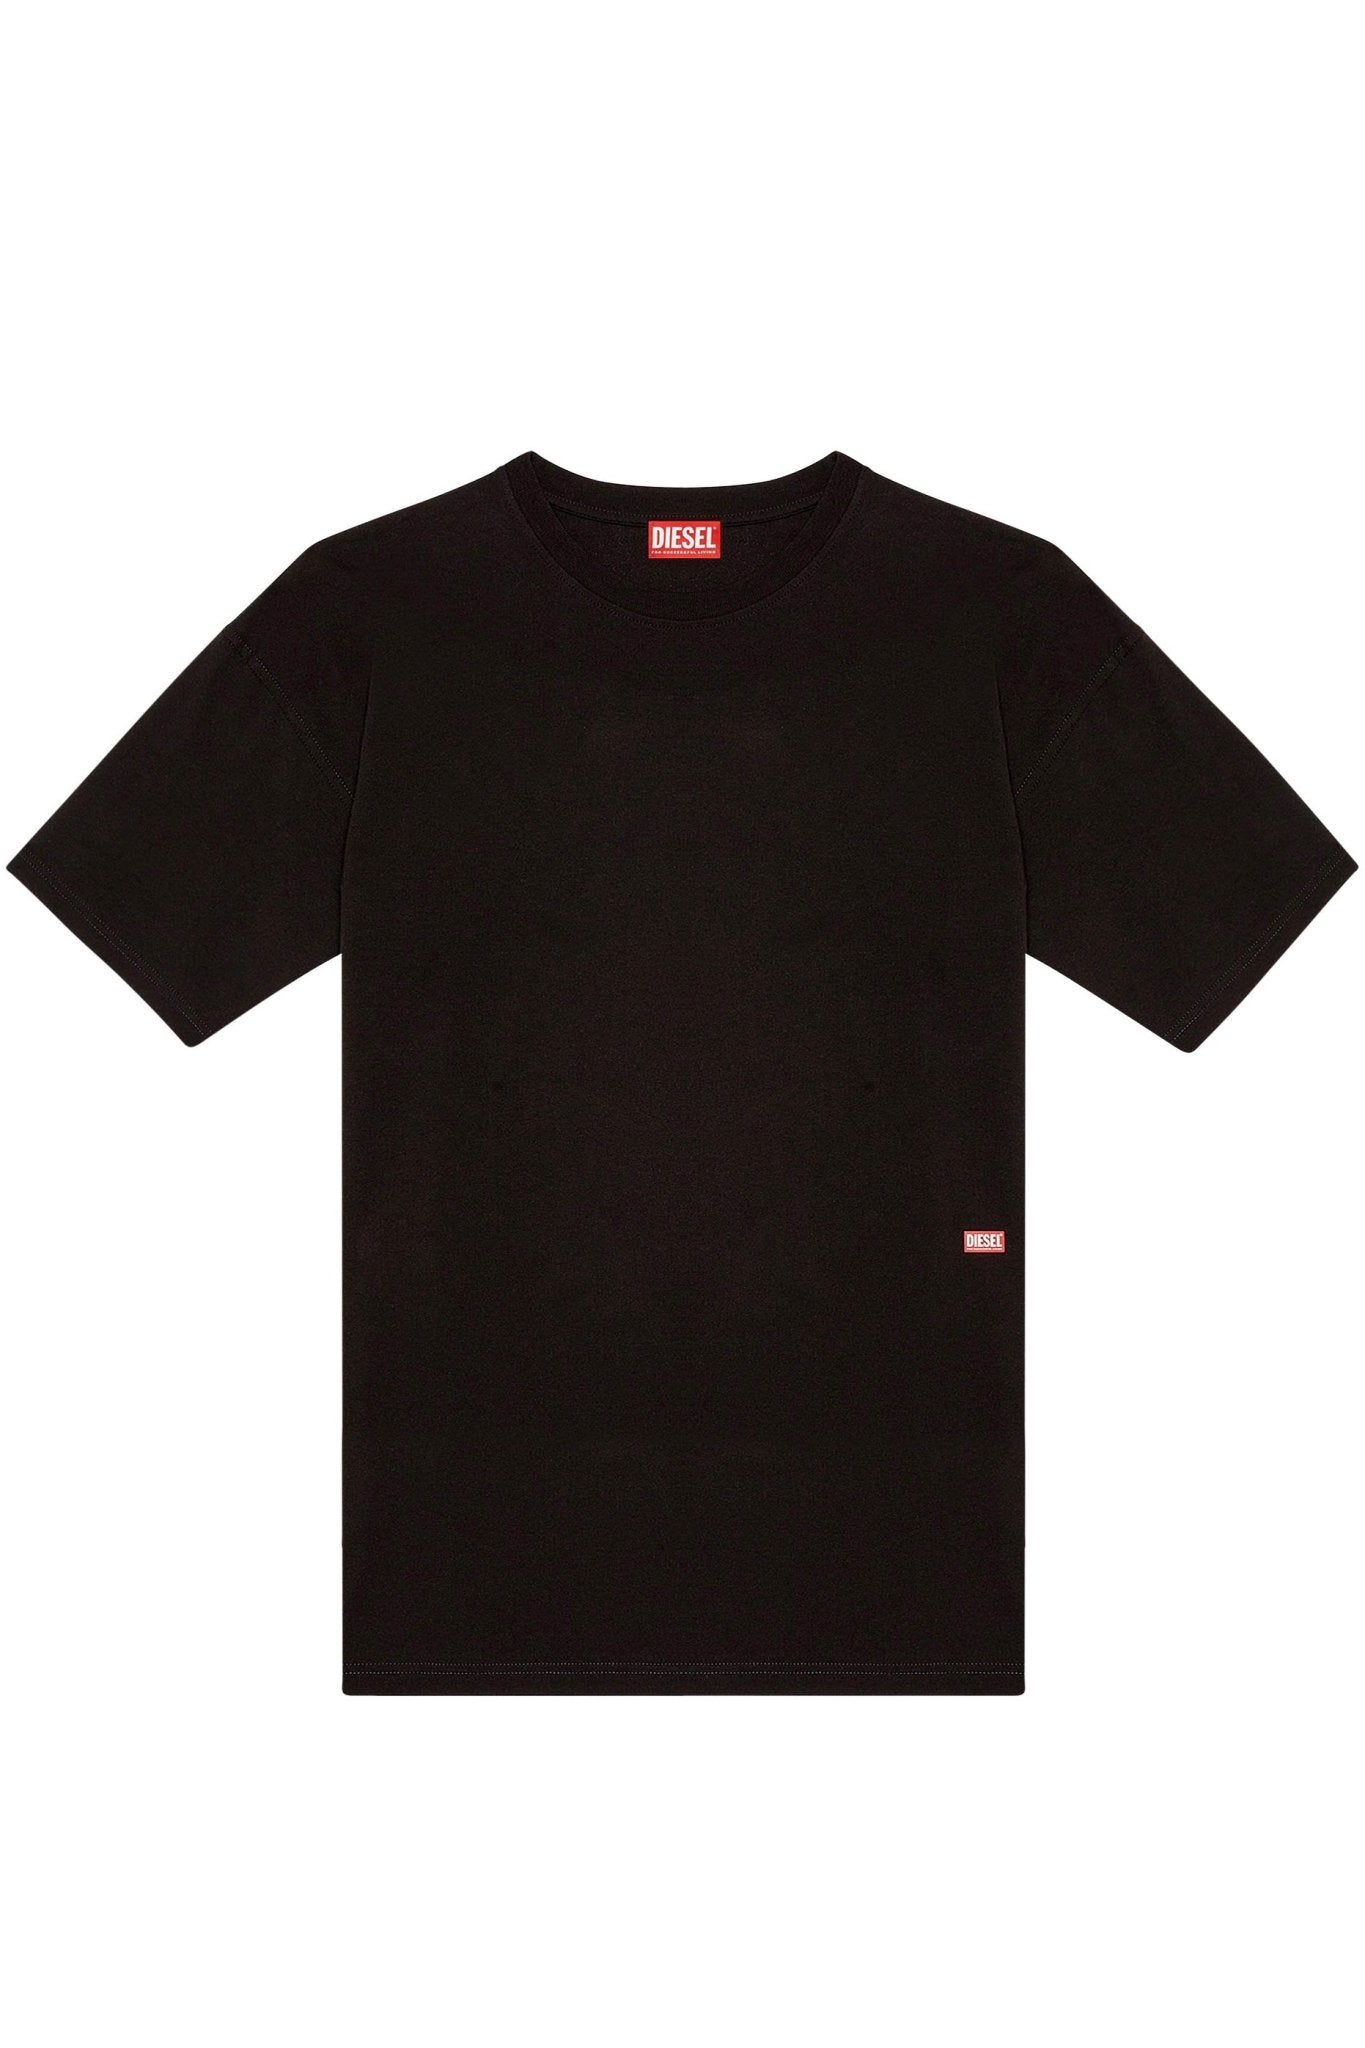 Men's black DIESEL T-BOXT-N11 T-shirt on a plain background, made of cotton jersey.